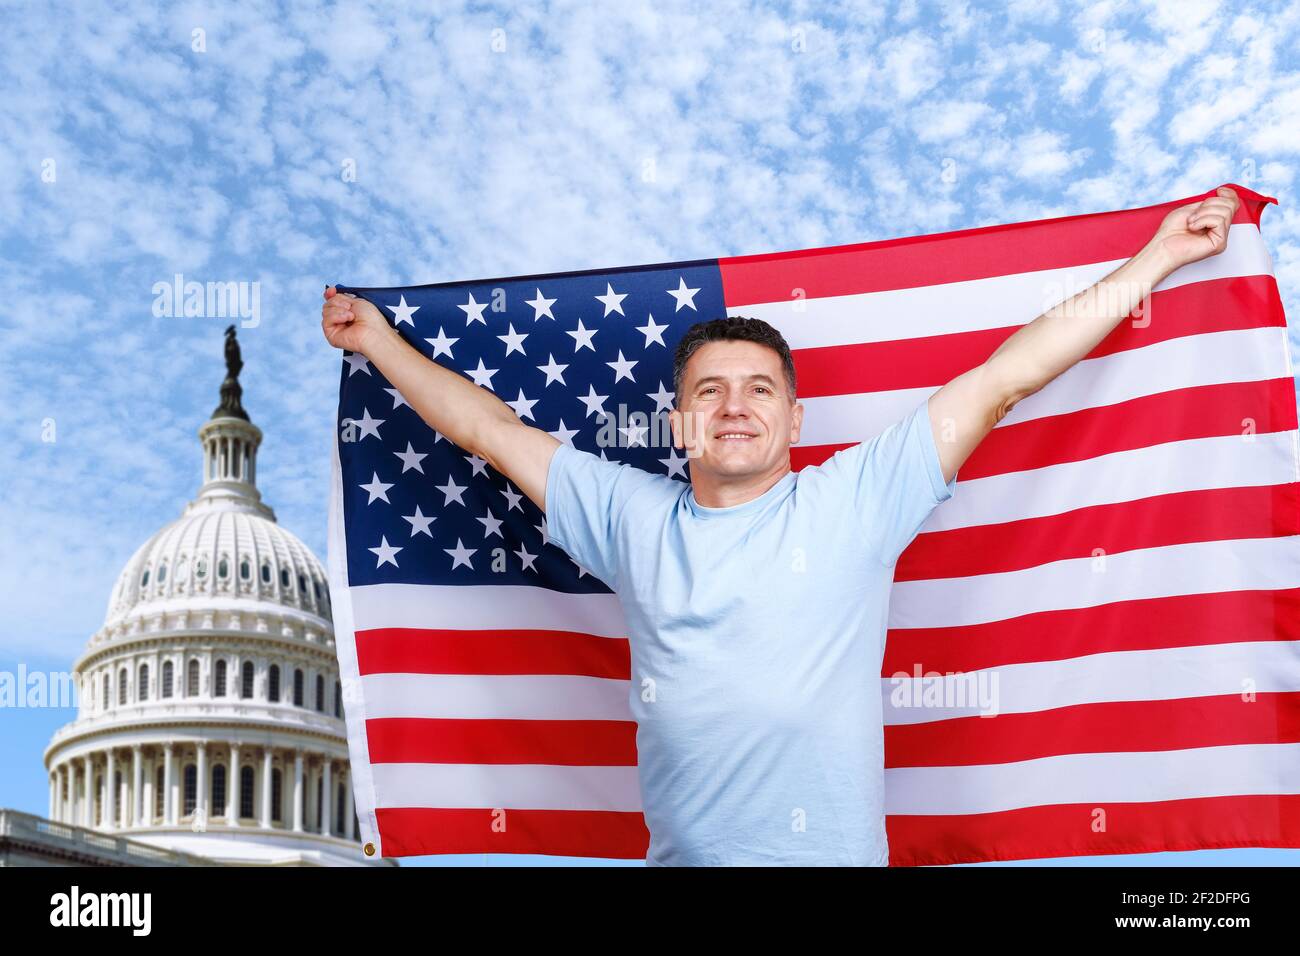 Man holds American flag in outstretched arms Stock Photo